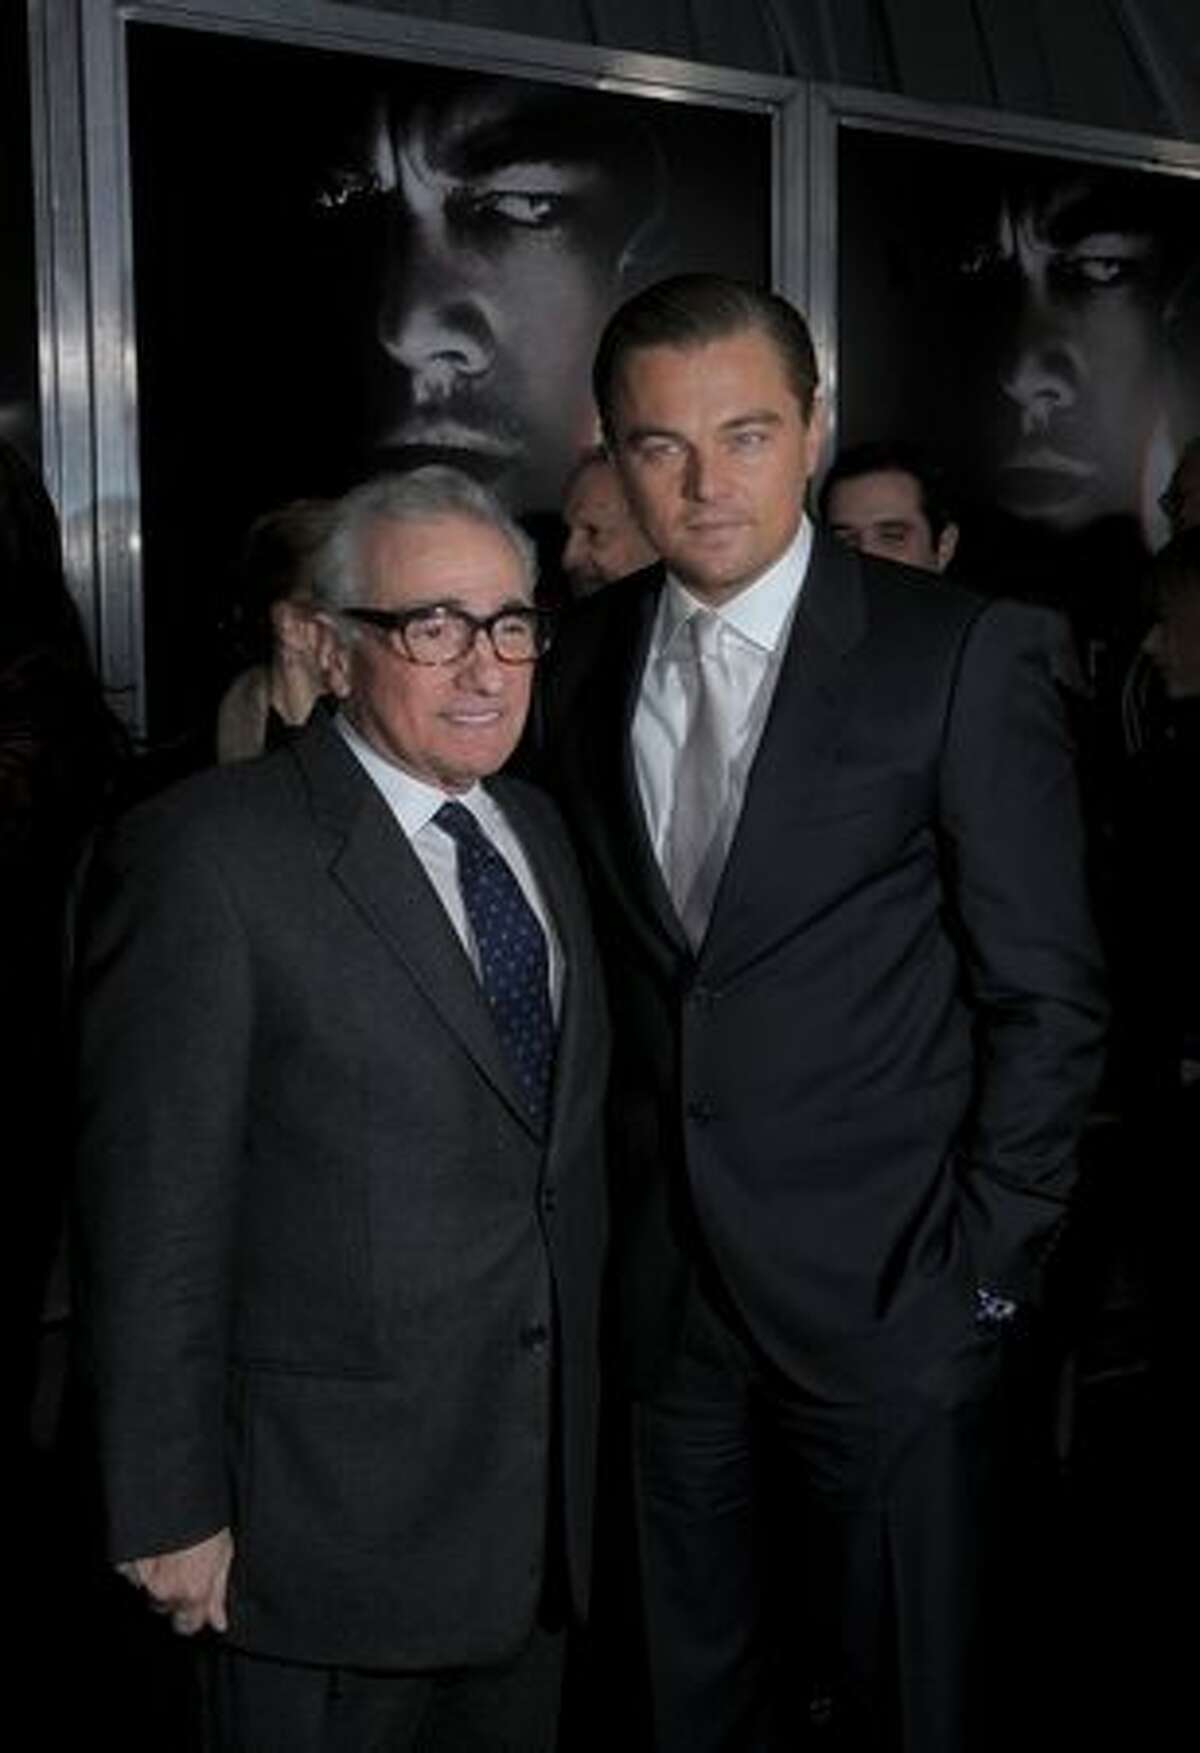 Director and producer Martin Scorsese and actor Leonardo DiCaprio attend the "Shutter Island" special screening at the Ziegfeld Theatre on February 17, 2010 in New York City.